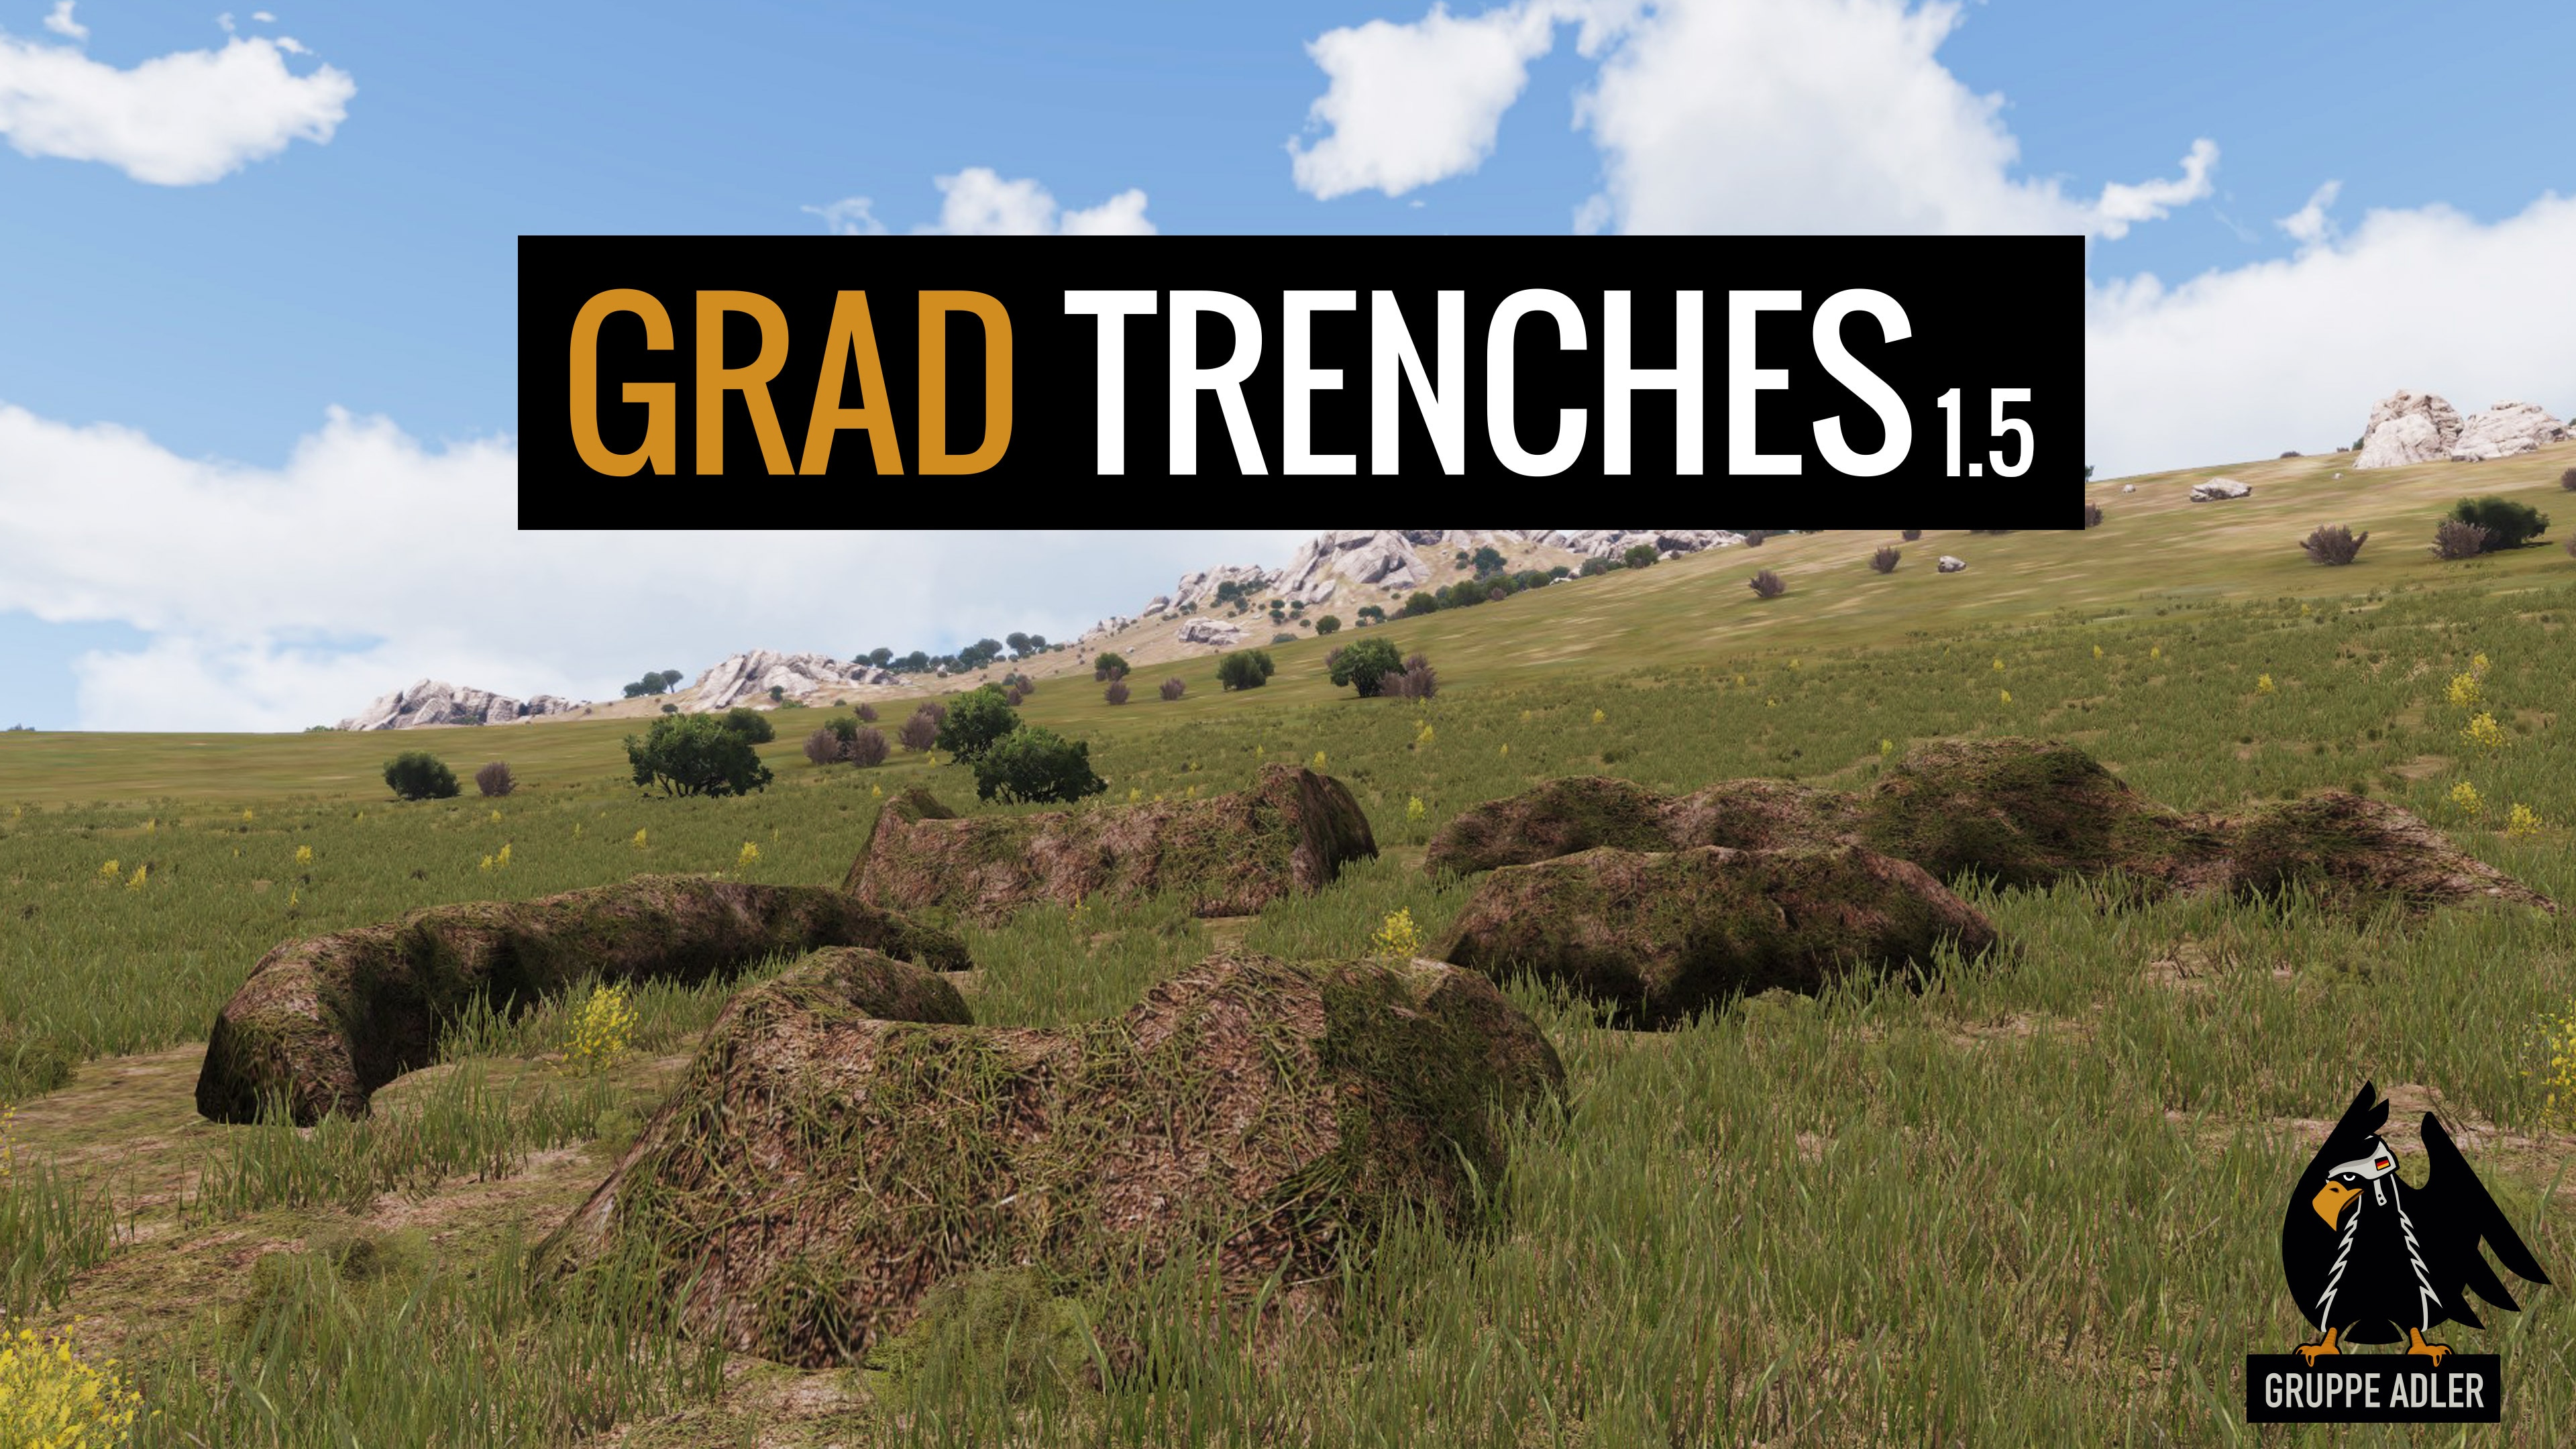 Арма мастерская. Арма 3 град. Trenches Arma 3. Арма 3 окопы. Арма 3 карта с окопами.